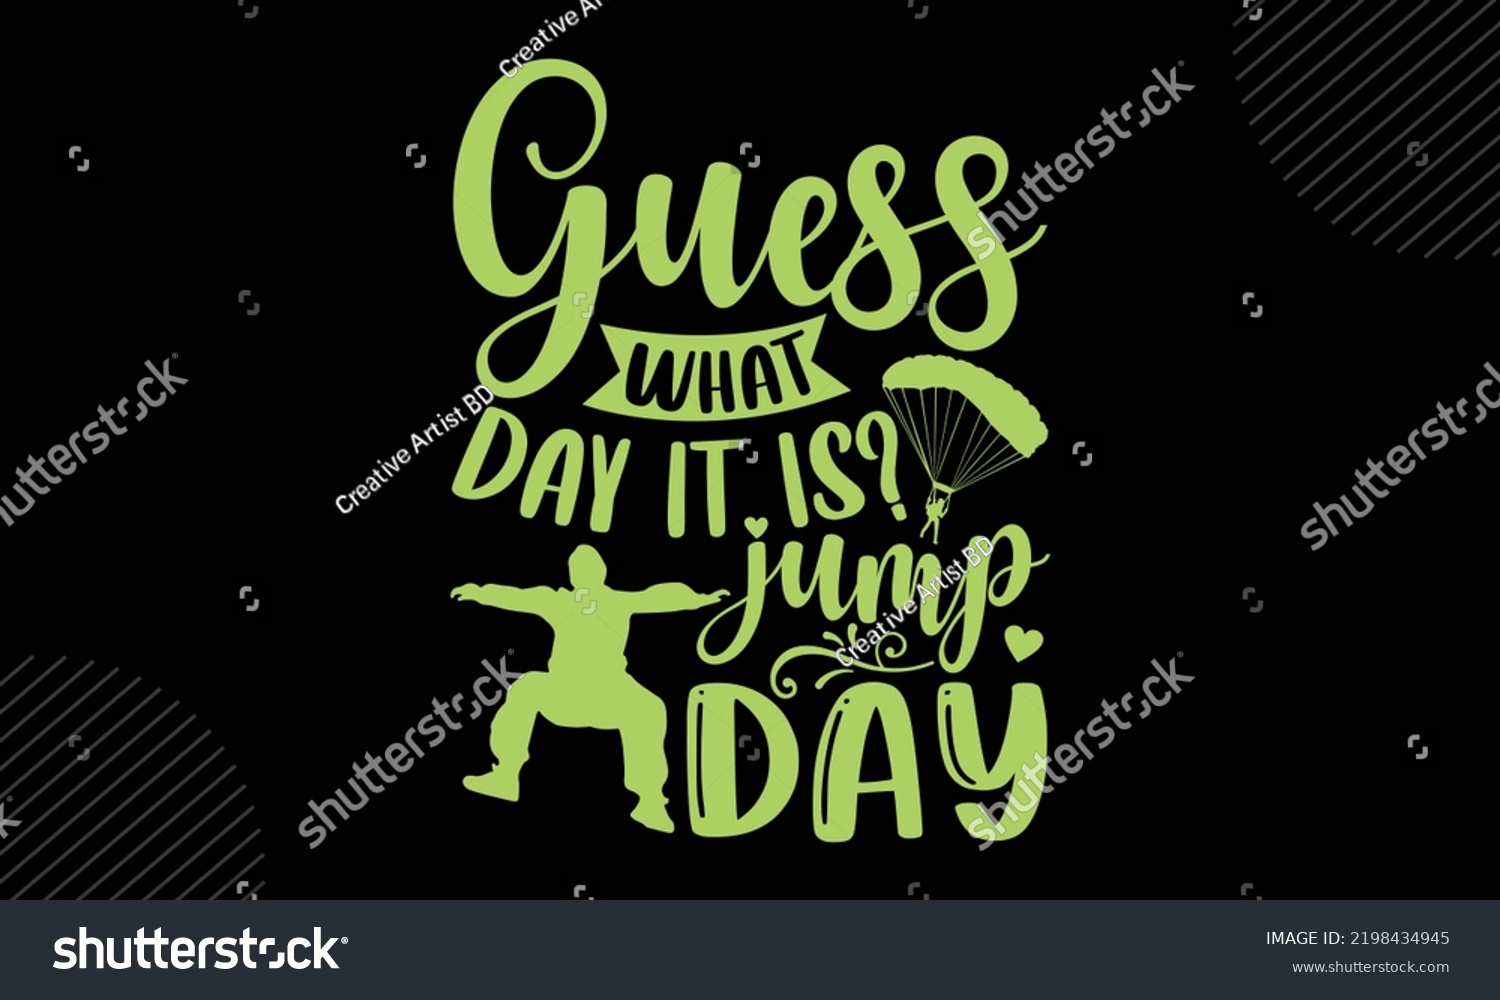 SVG of Guess What Day It Is? Jump Day  - Skydiving T shirt Design, Hand drawn vintage illustration with hand-lettering and decoration elements, Cut Files for Cricut Svg, Digital Download svg